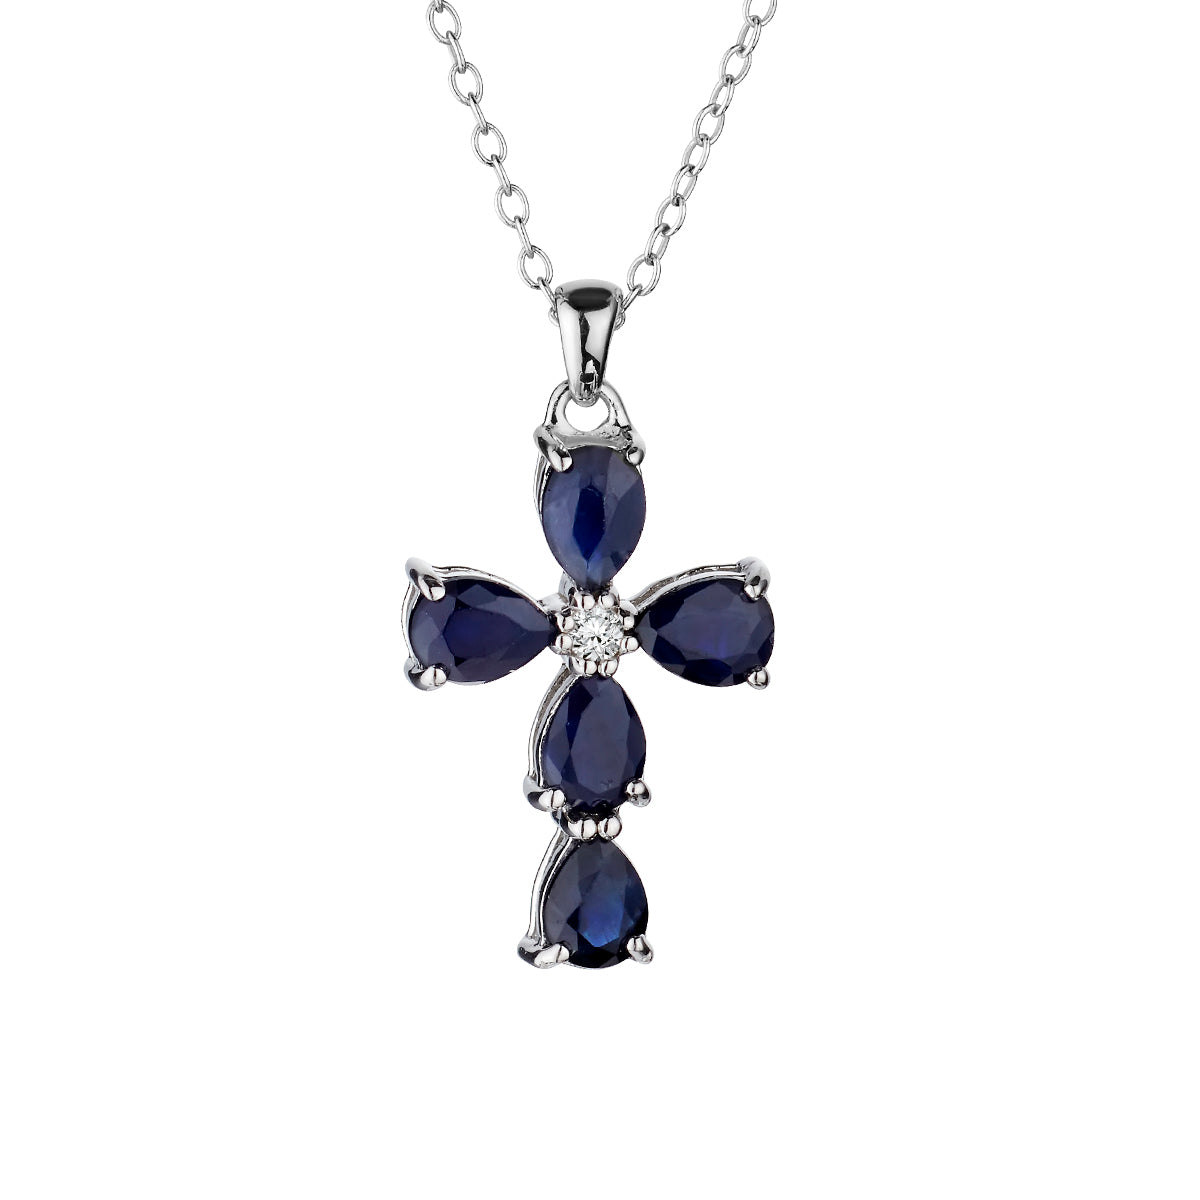 .75 Carat Genuine Sapphire and White Zircon Cross Pendant,  Sterling Silver. Necklaces and Pendants. Griffin Jewellery Designs. 